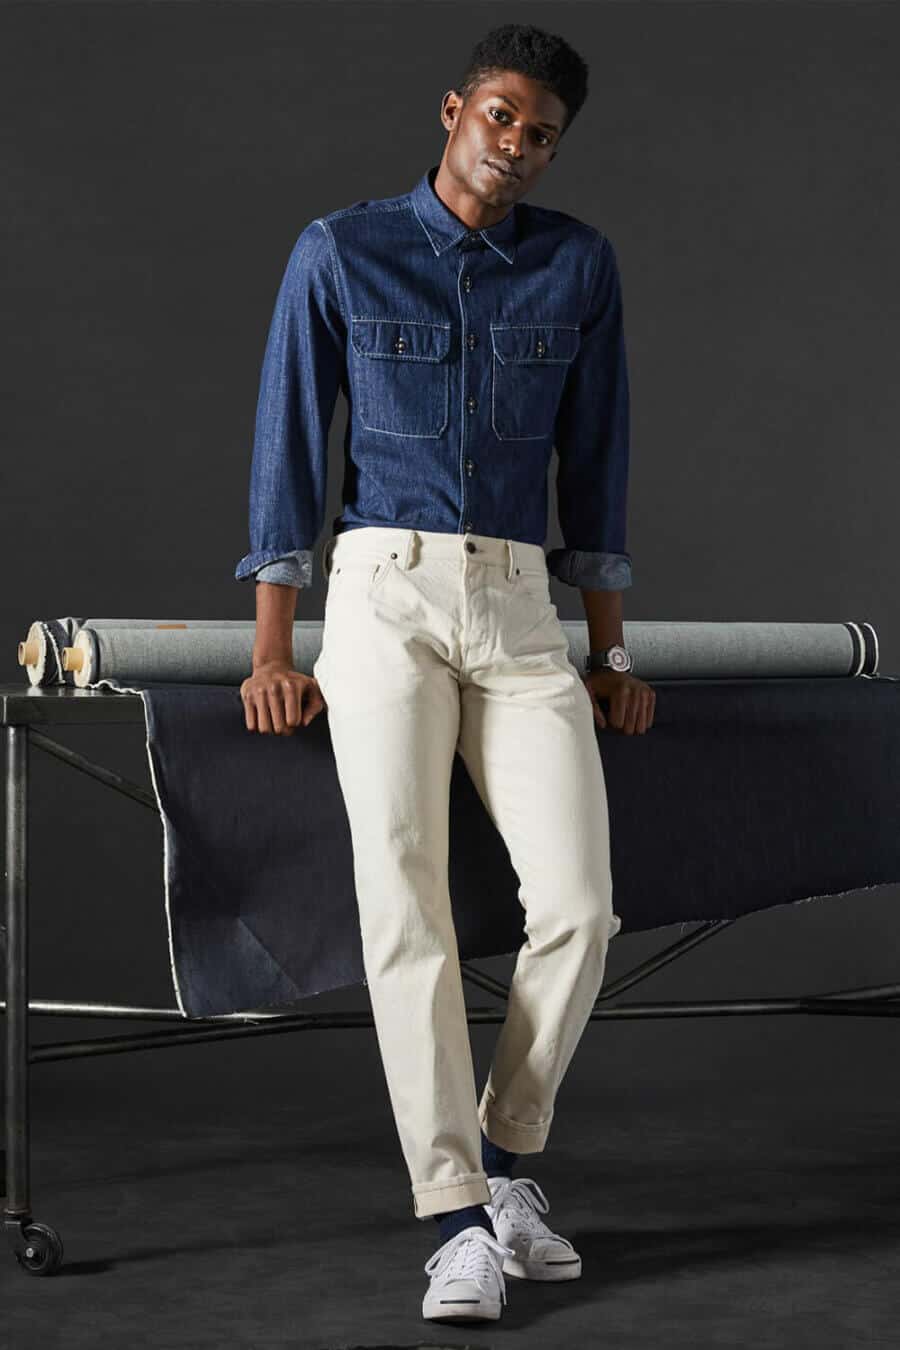 Men's double denim outfit - off white jeans and dark blue shirt